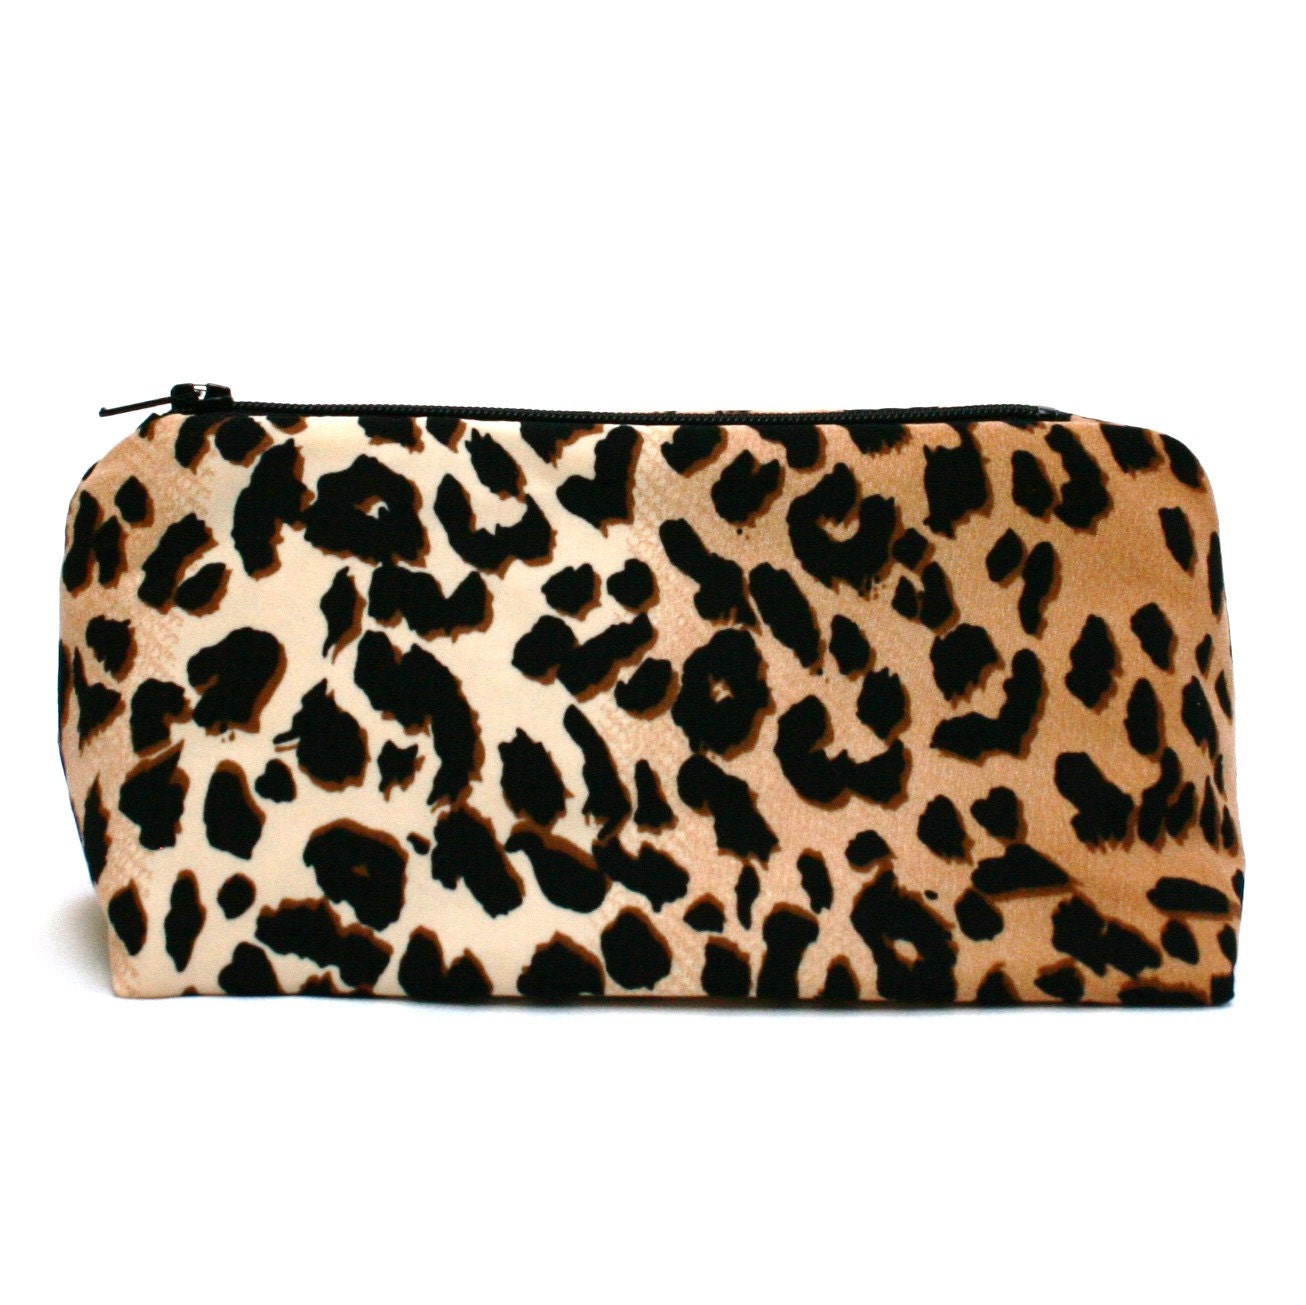 Bridesmaid Gift in Leopard Print Cosmetic Case / by JordaniSarreal